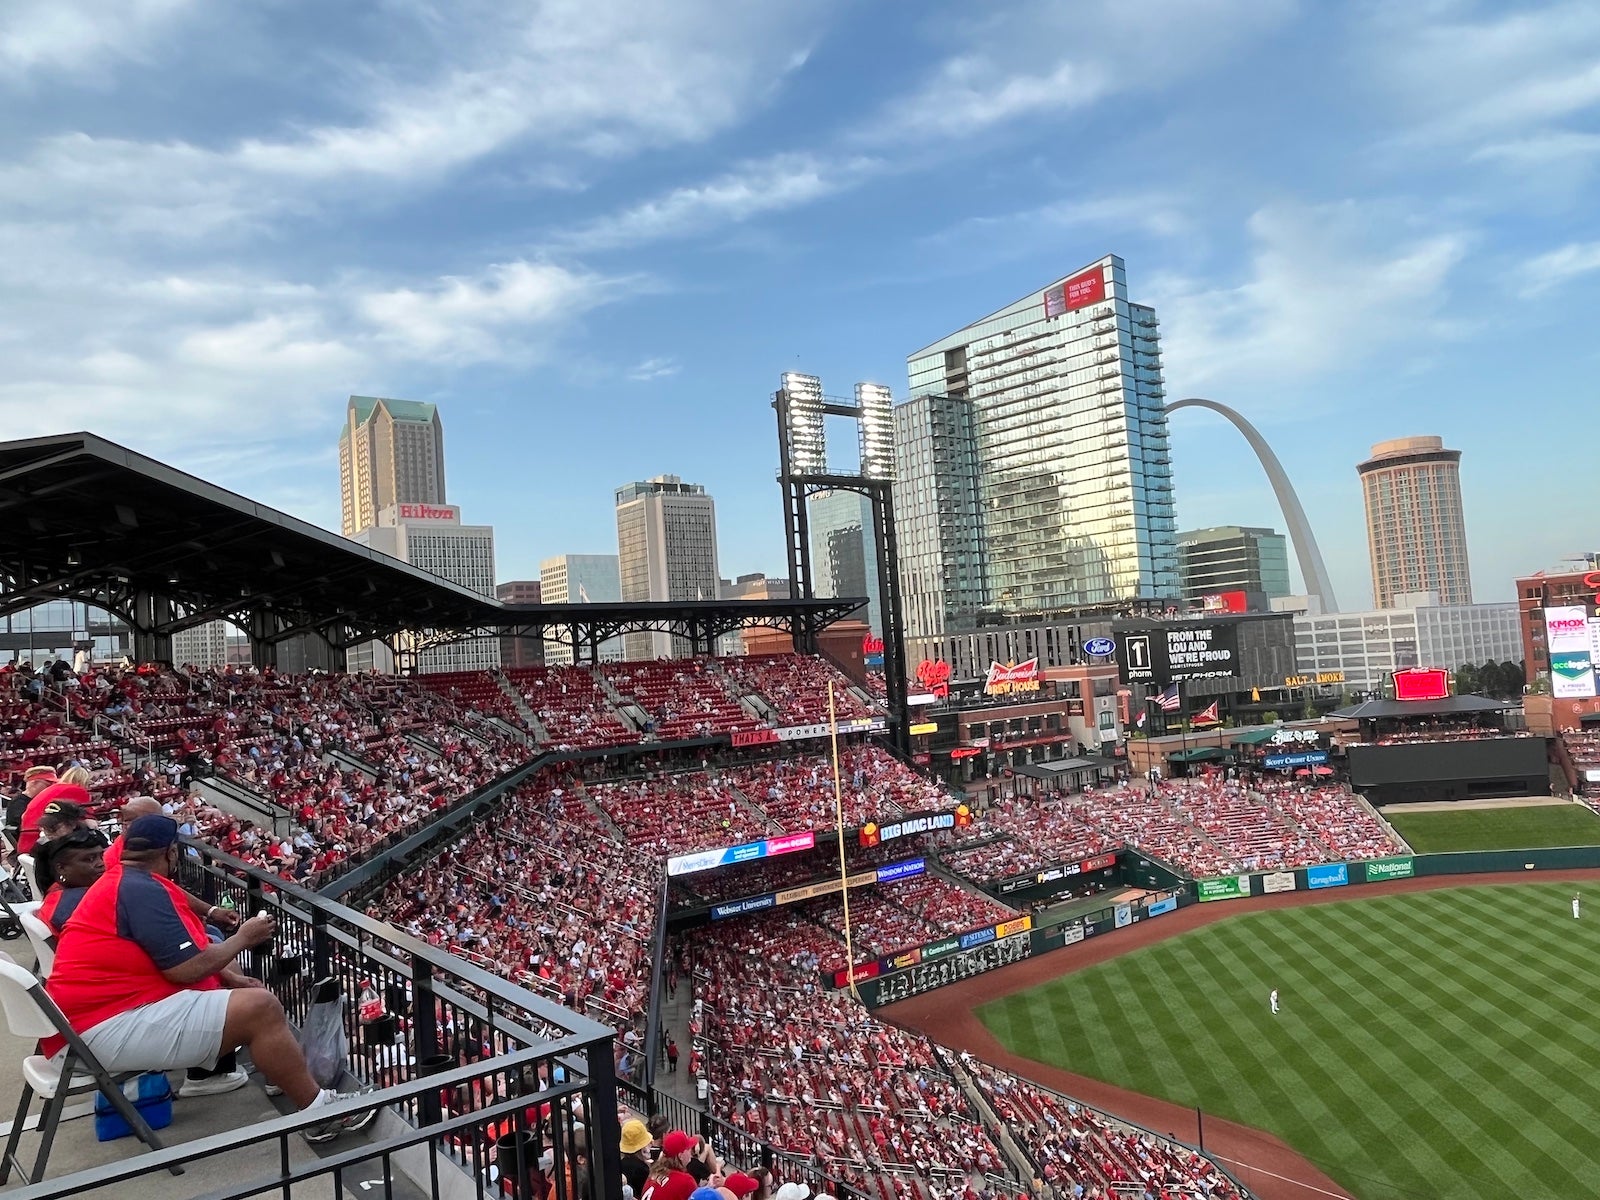 The places blessed with ballpark views during MLB's no-fans era